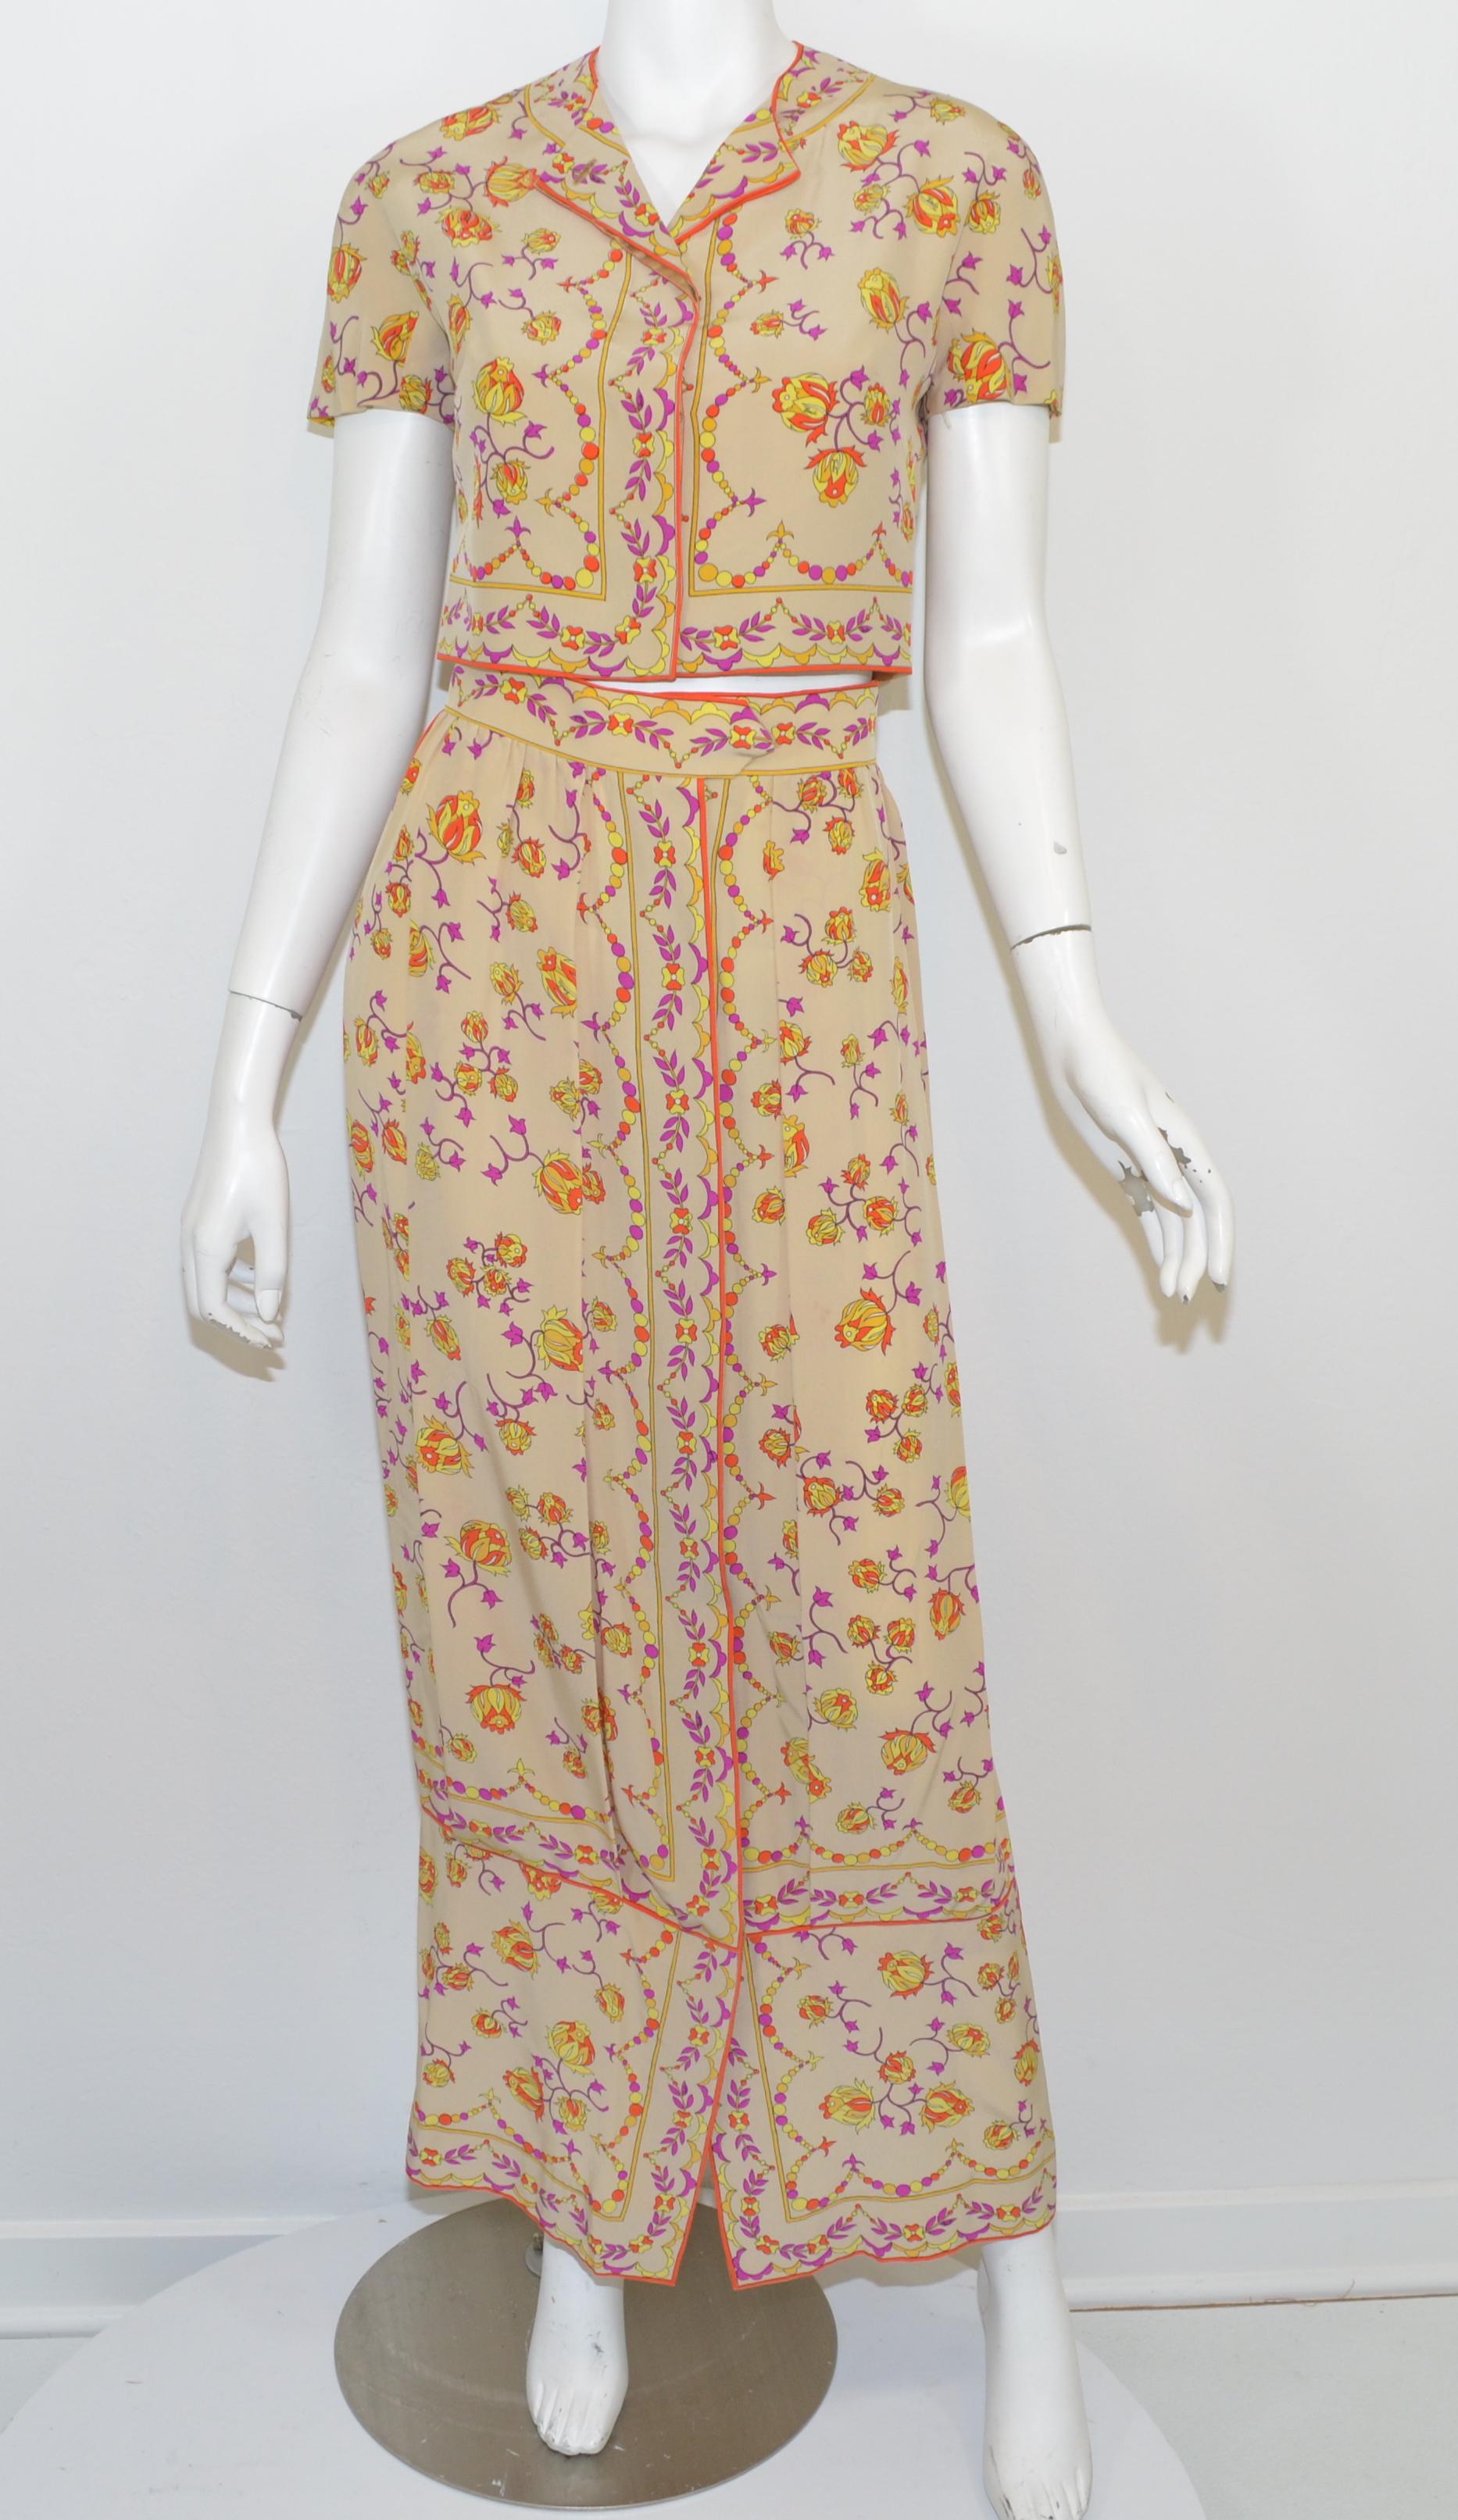 Vintage Emilio Pucci skirt set featured a floral print along a beige background. Top is cropped and has concealed button closures. Skirt has a drop waist style and a full button front closure. 

Measurements:
Top - bust 36'', length 16''
Skirt  -